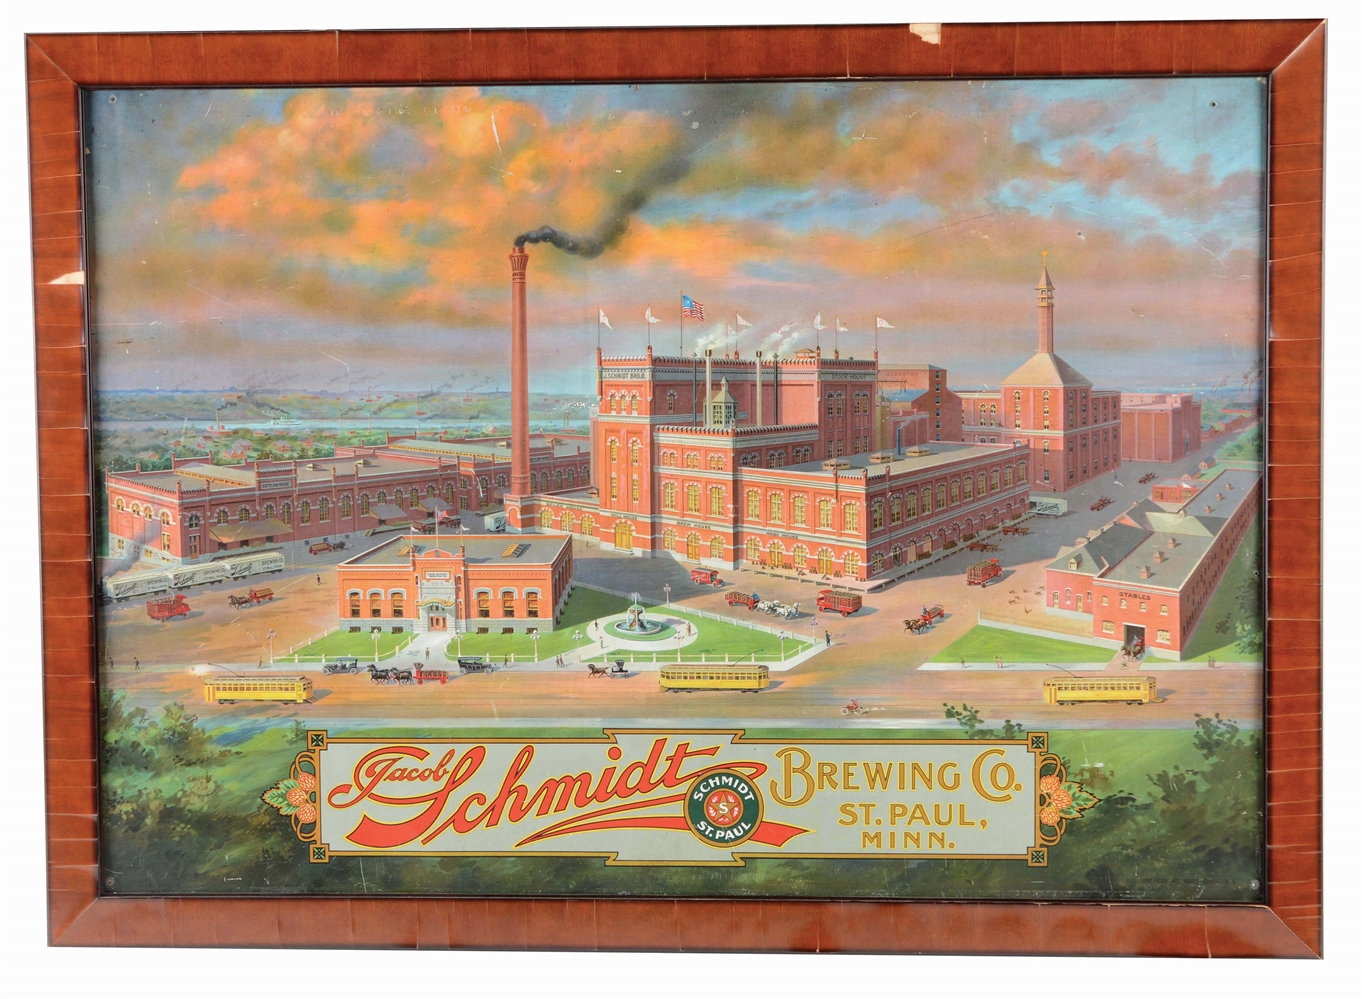 SCHMIDT BREWING COMPANCY TIN LITHO ADVERTISING SIGN. 